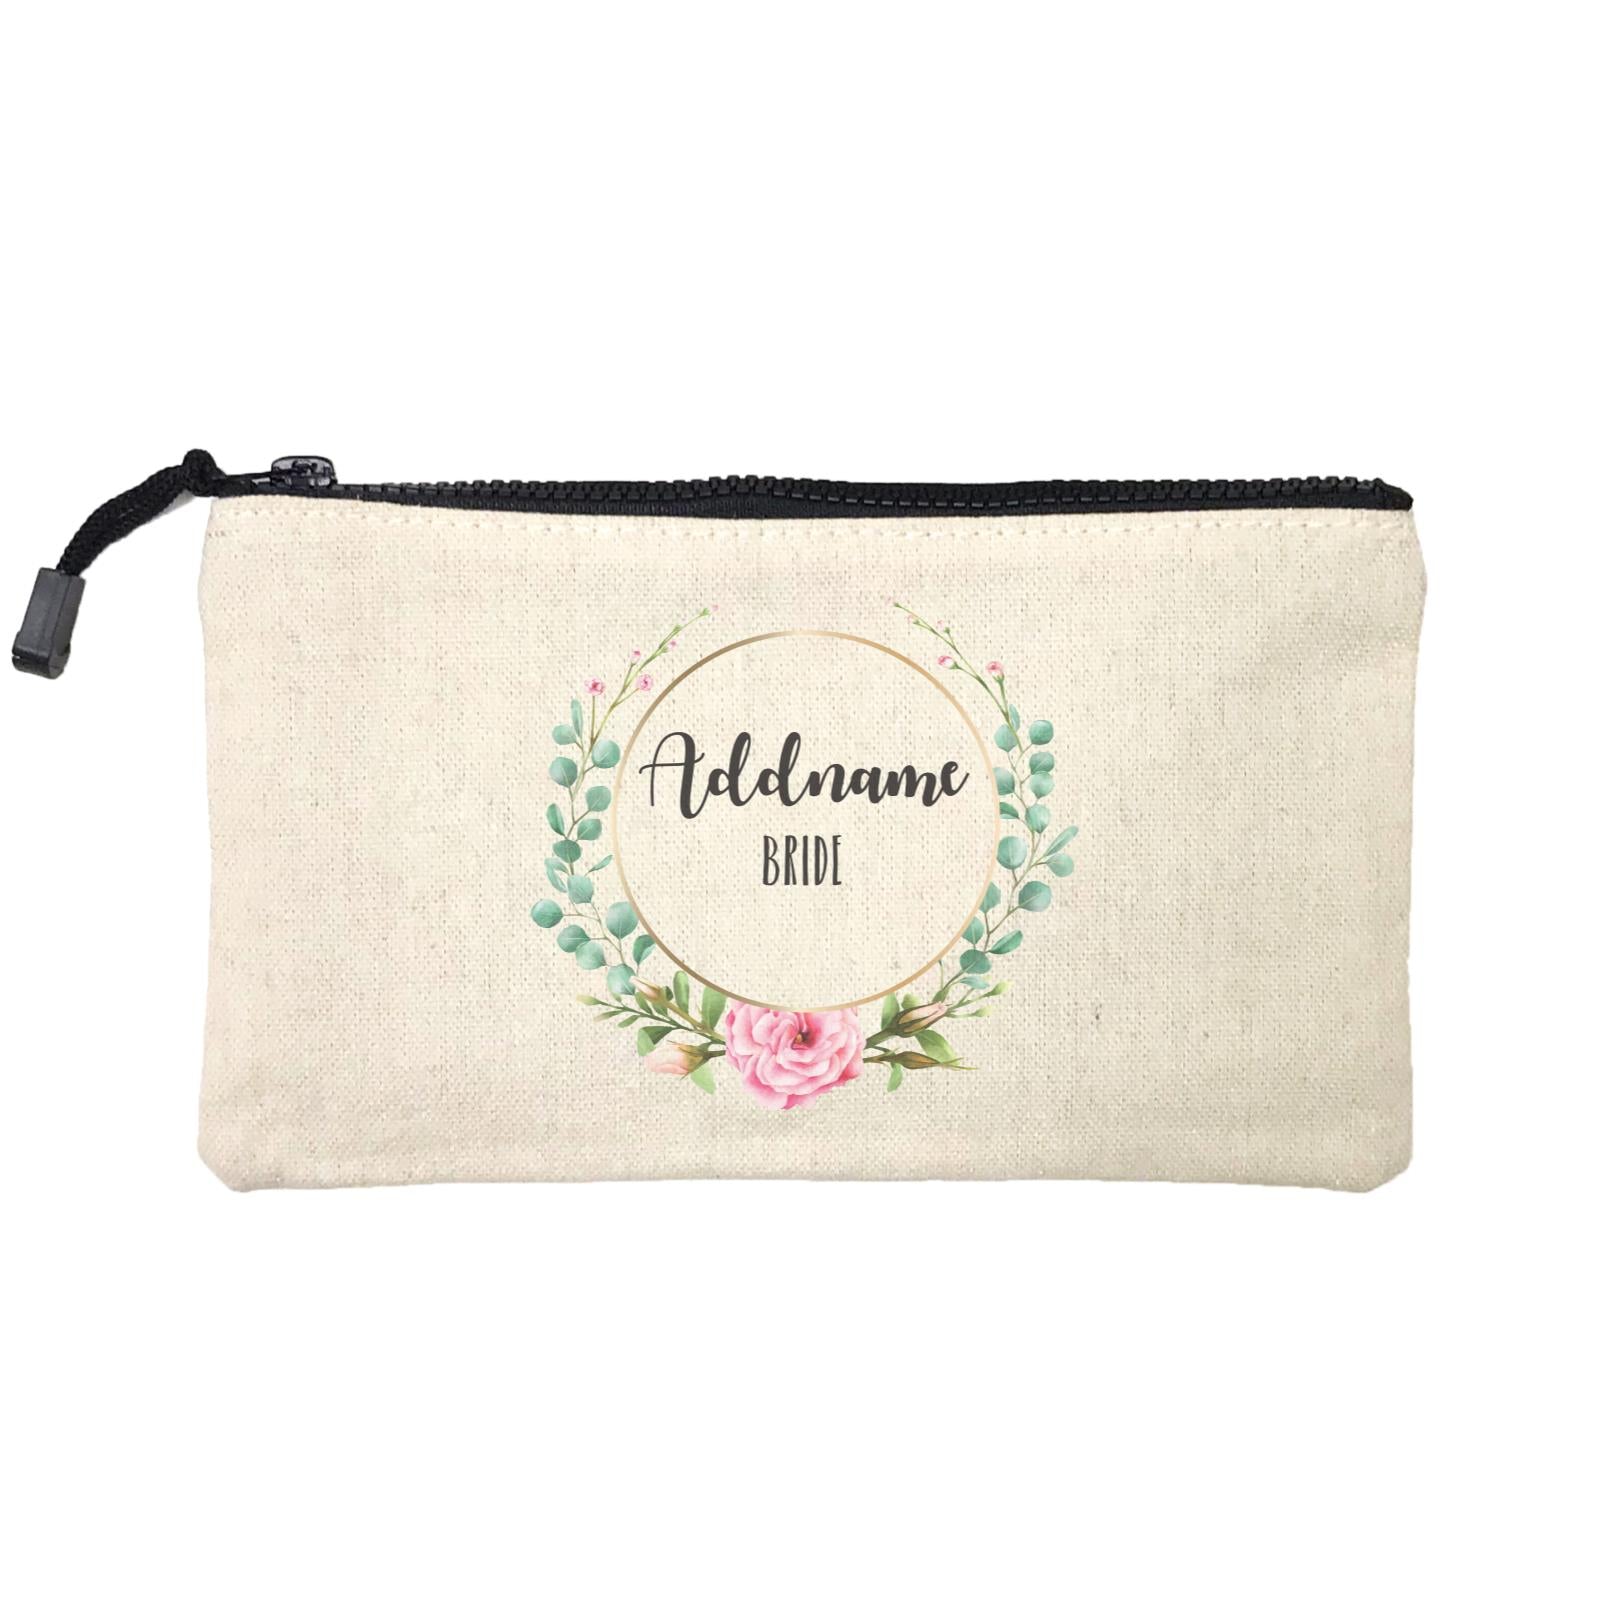 Bridesmaid Floral Modern Pink Flowers With Circle Bride Addname Mini Accessories Stationery Pouch